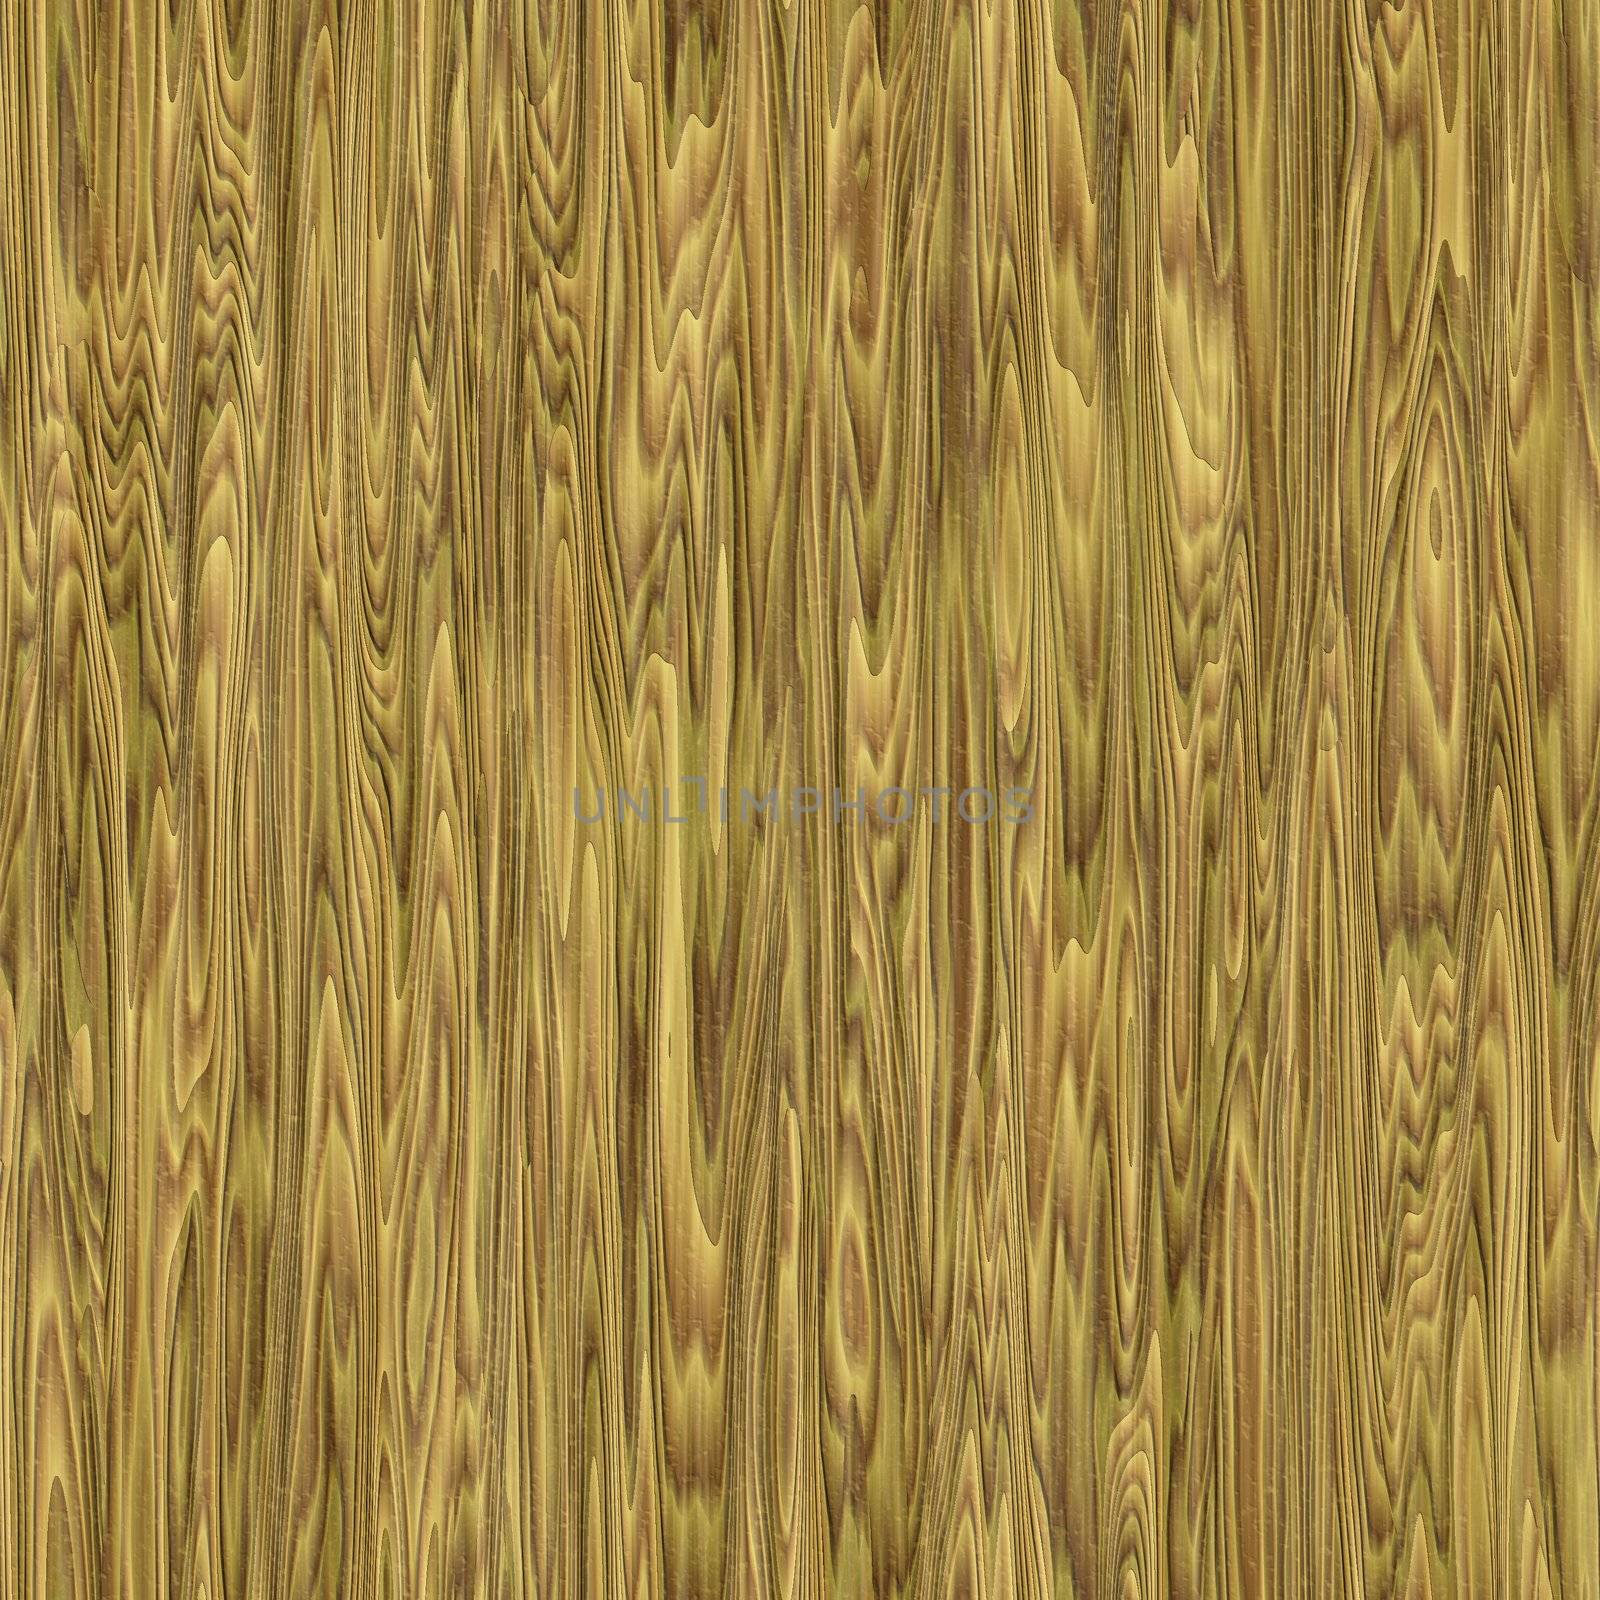 Wood Background by kentoh